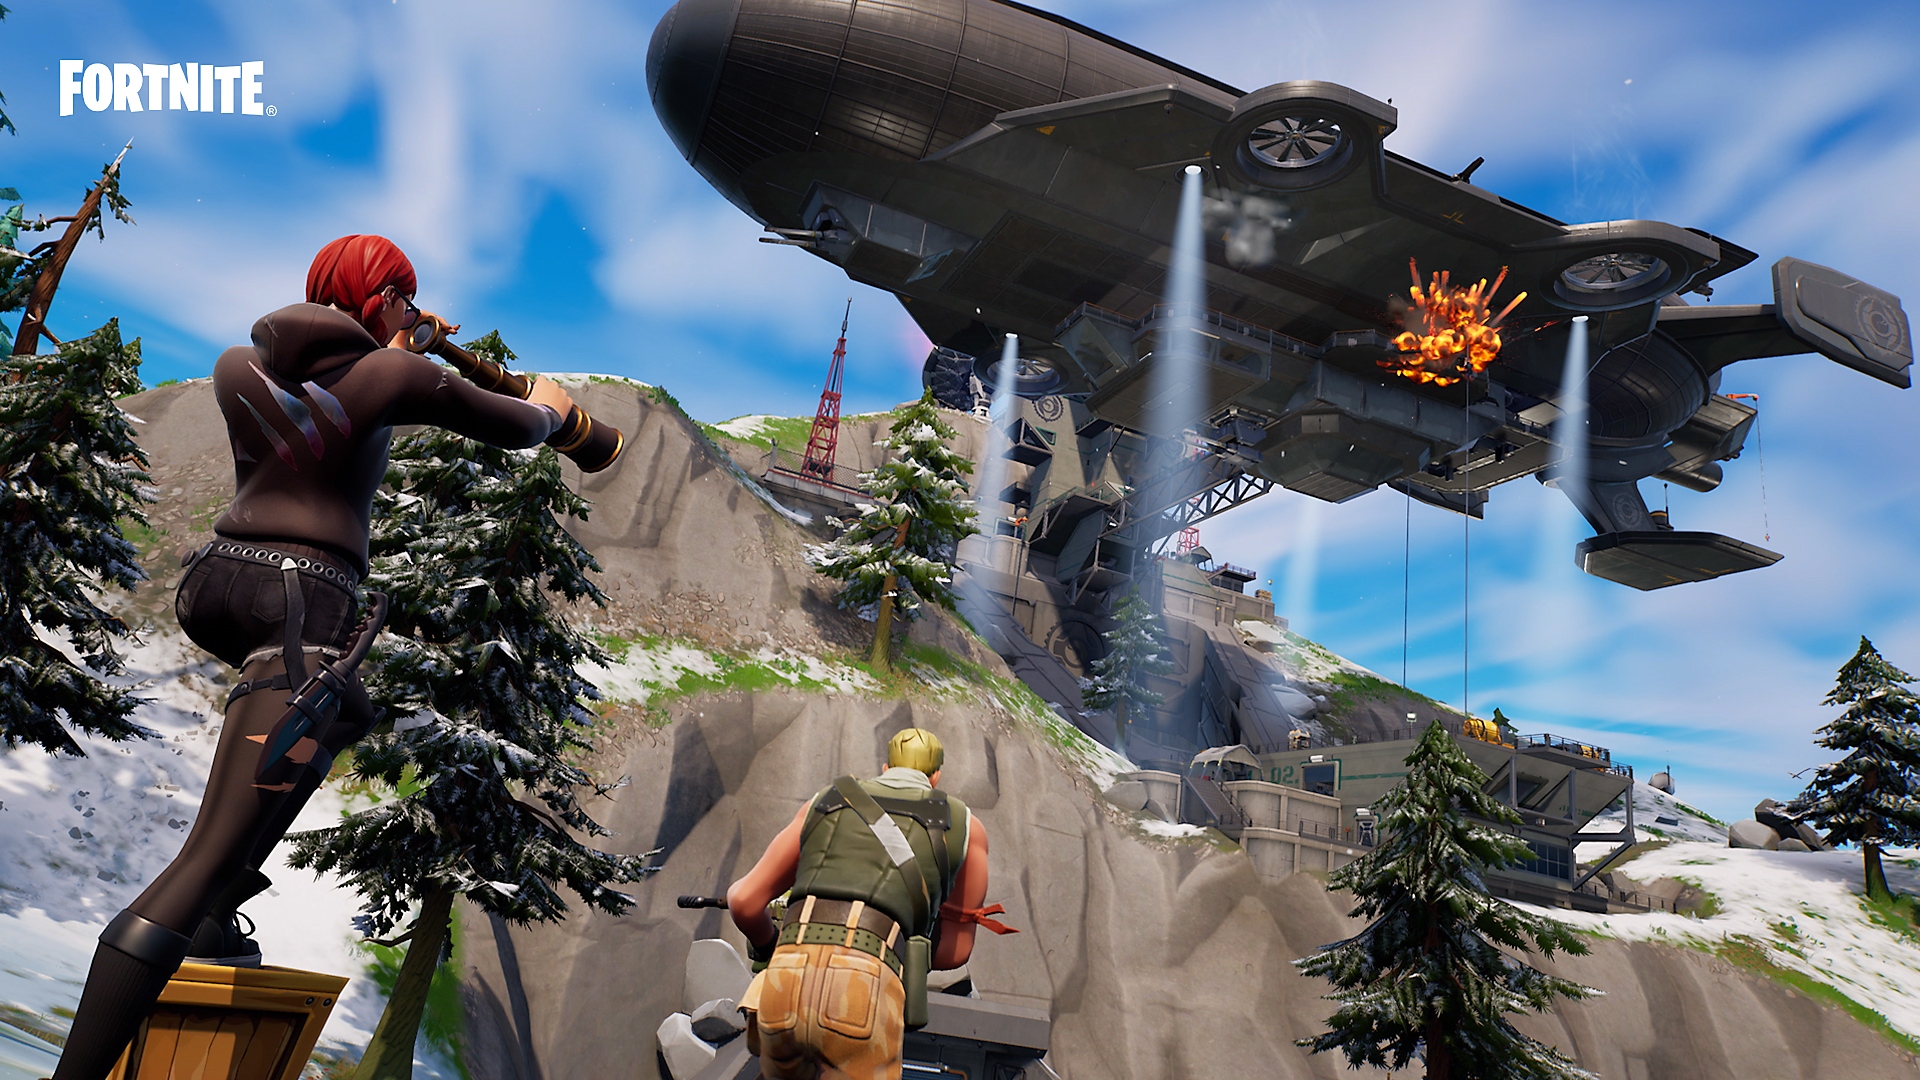 Fortnite zero build mode - characters climbing a cliff toward a large aircraft